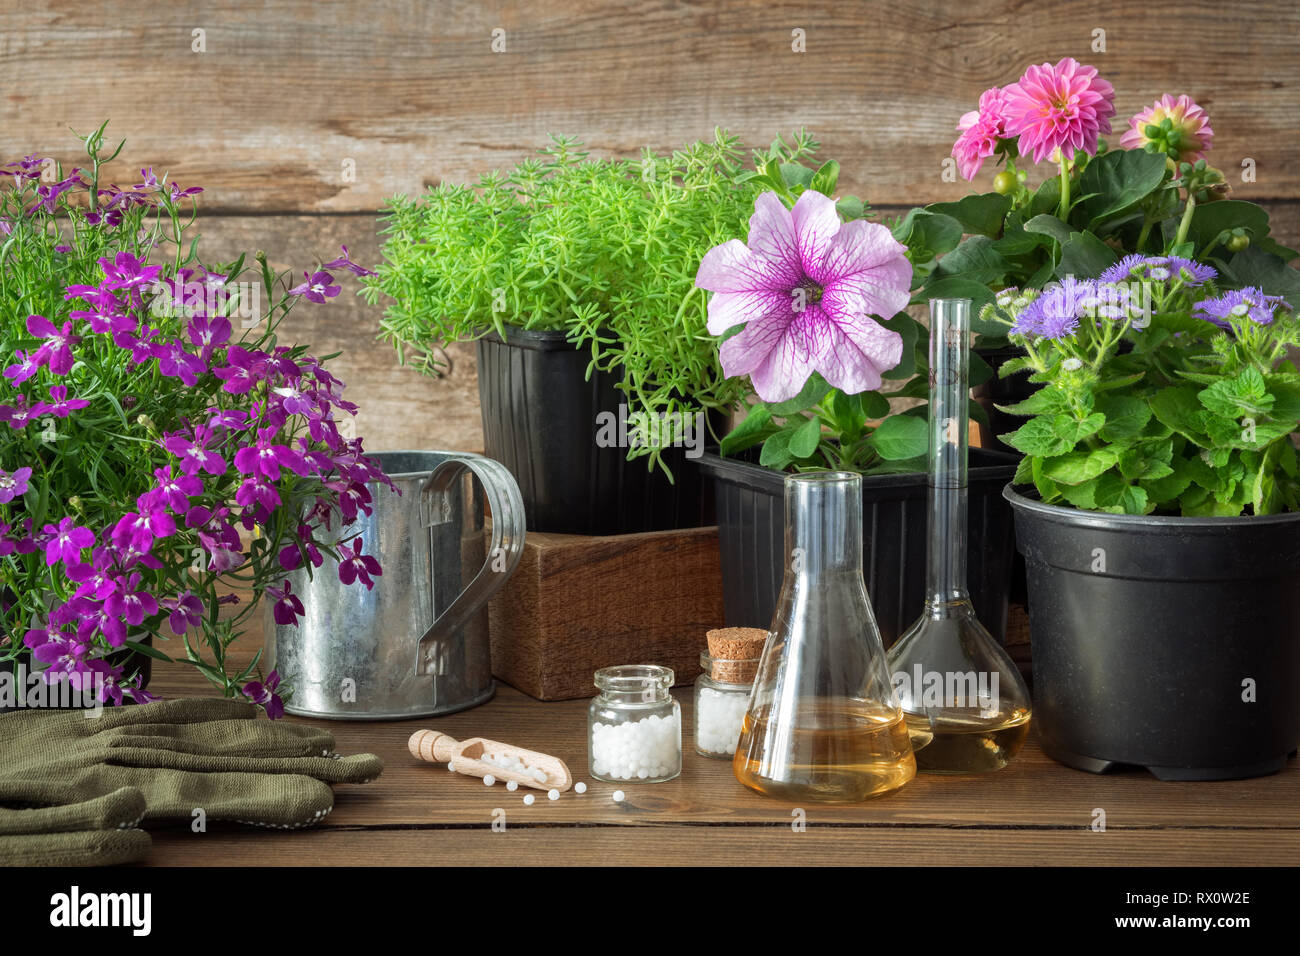 Seedling of garden plants and flowers, watering can and homeopathic remedies for plants. Natural alternative treatment of plant diseases. Stock Photo